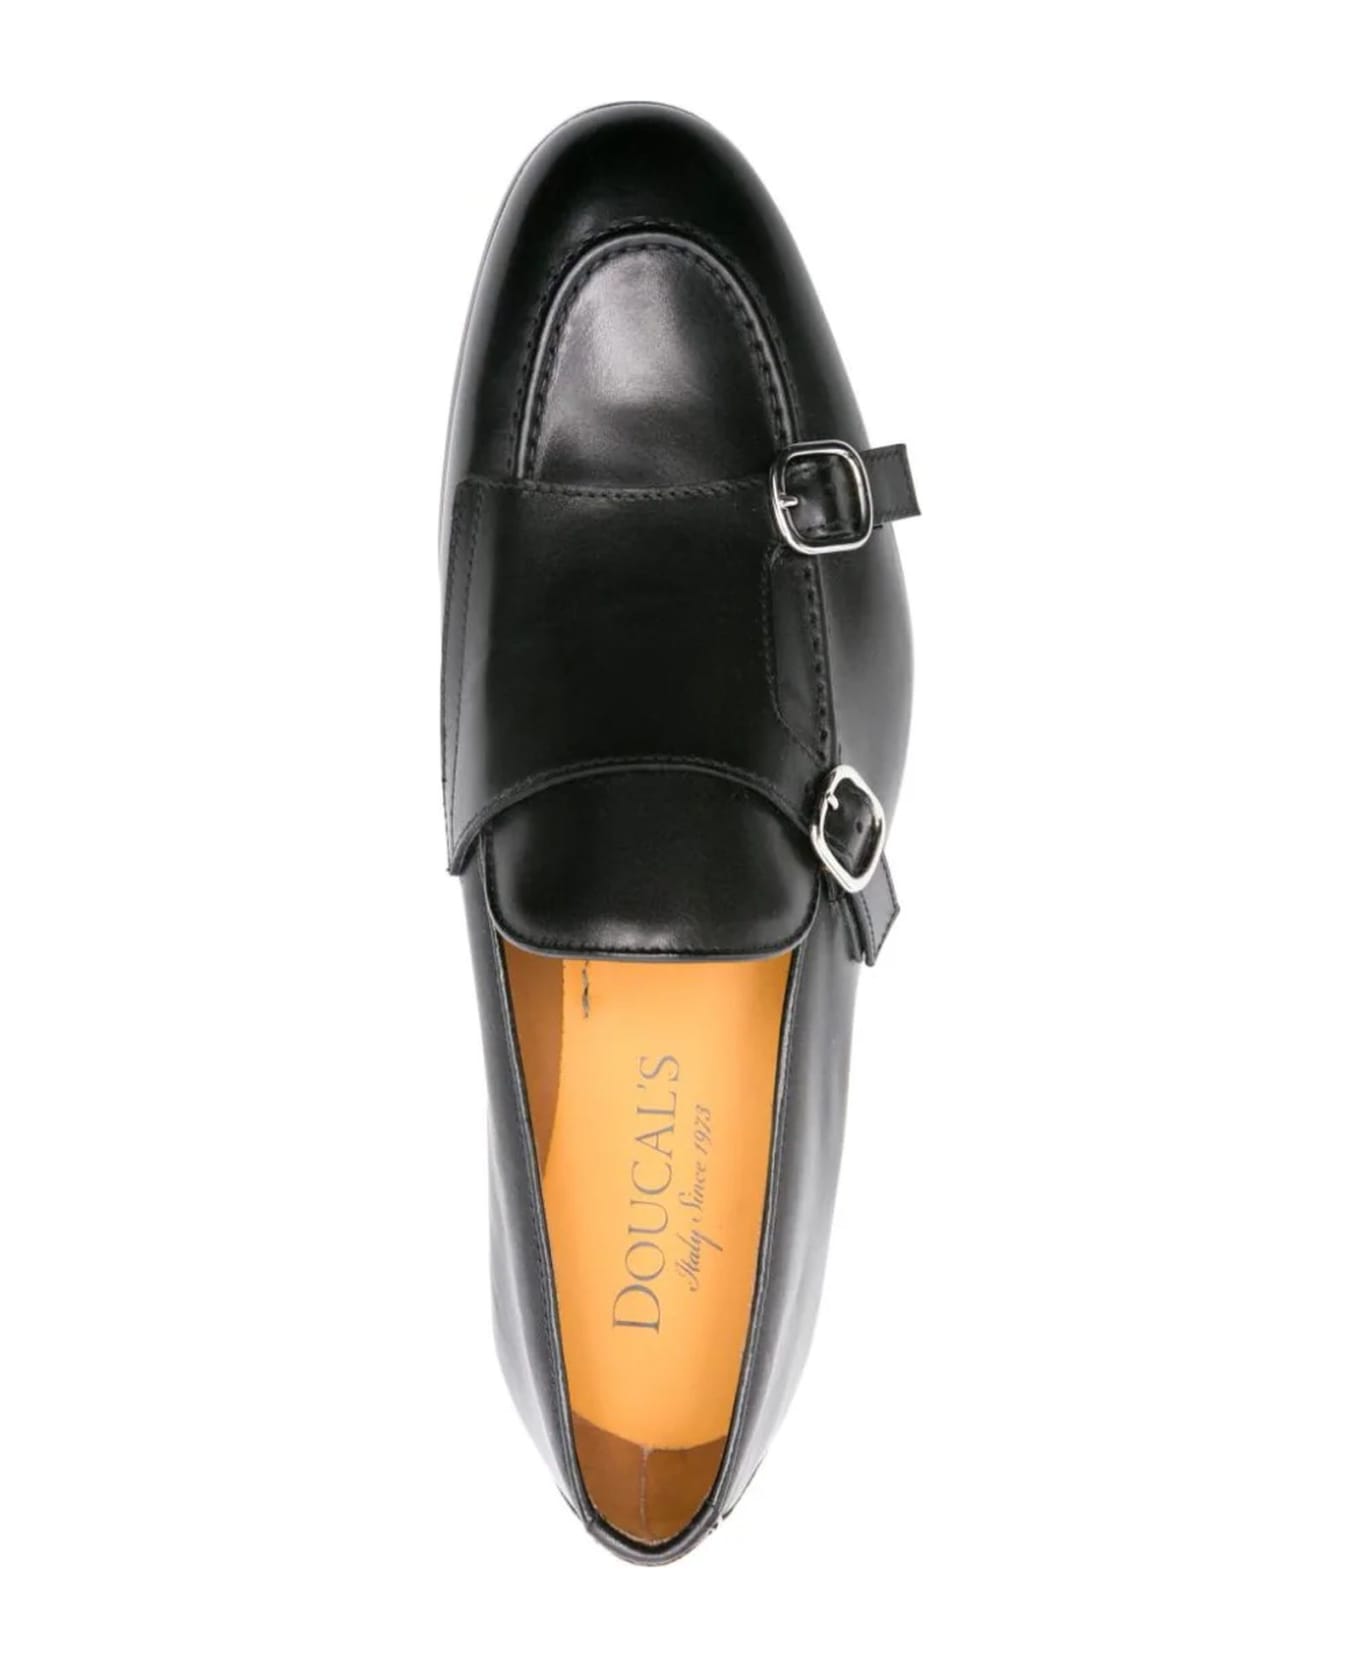 Doucal's Double-buckle Loafer In Black Leather - Black ローファー＆デッキシューズ